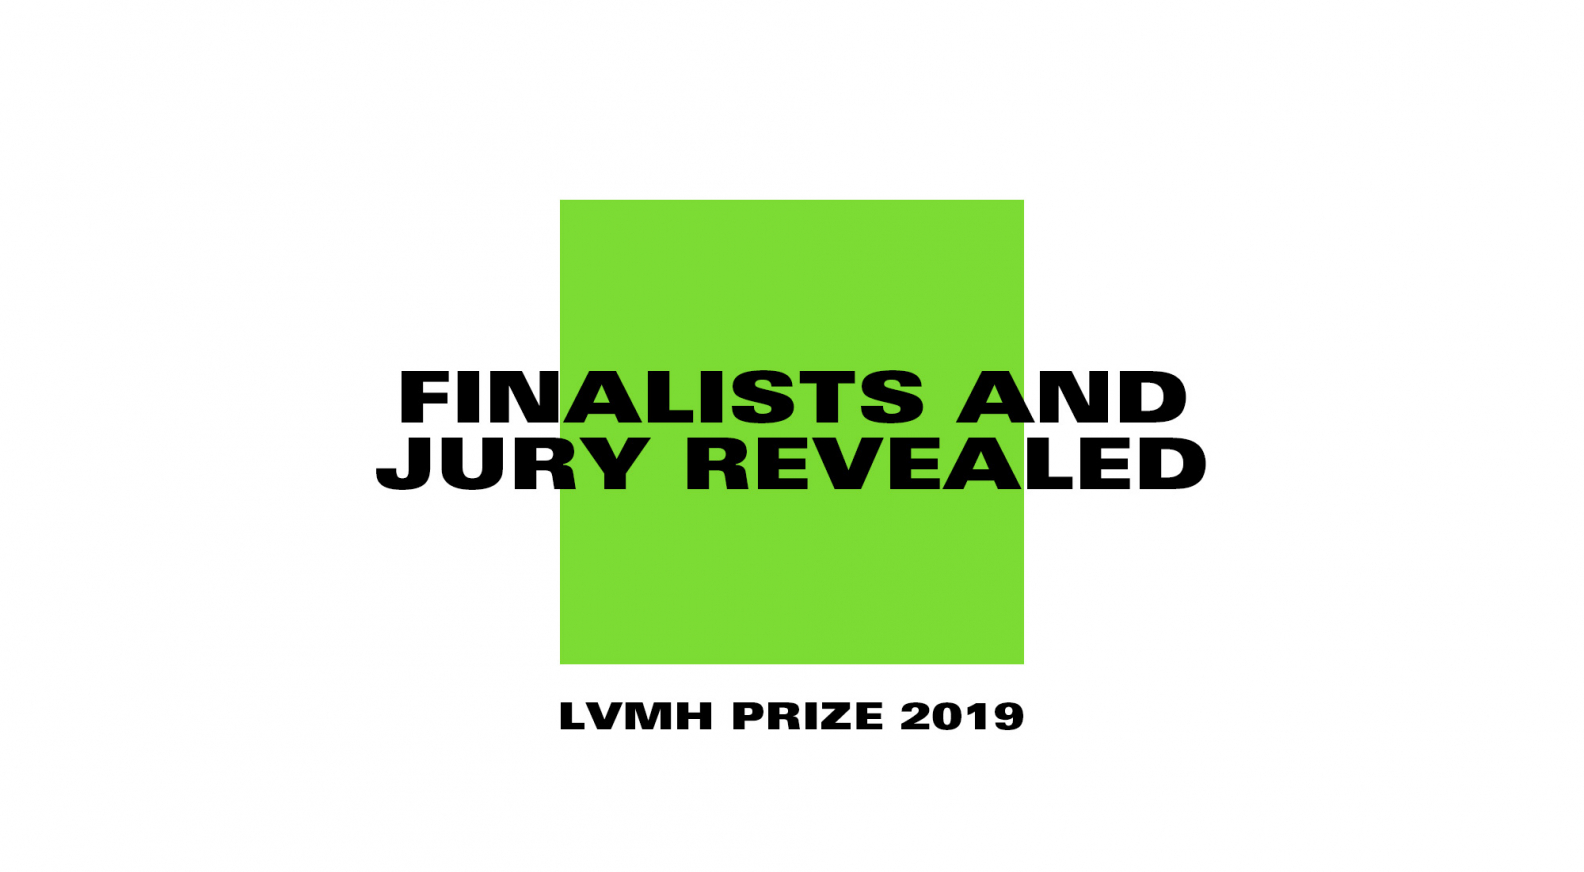 24S - LVMH PRIZE // Congratulations to the 8 finalists of the 2019 LVMH  Prize! Discover them here: bit.ly/LVMHPrize2019 #LVMHPrize #LVMHPrize2019  #24S